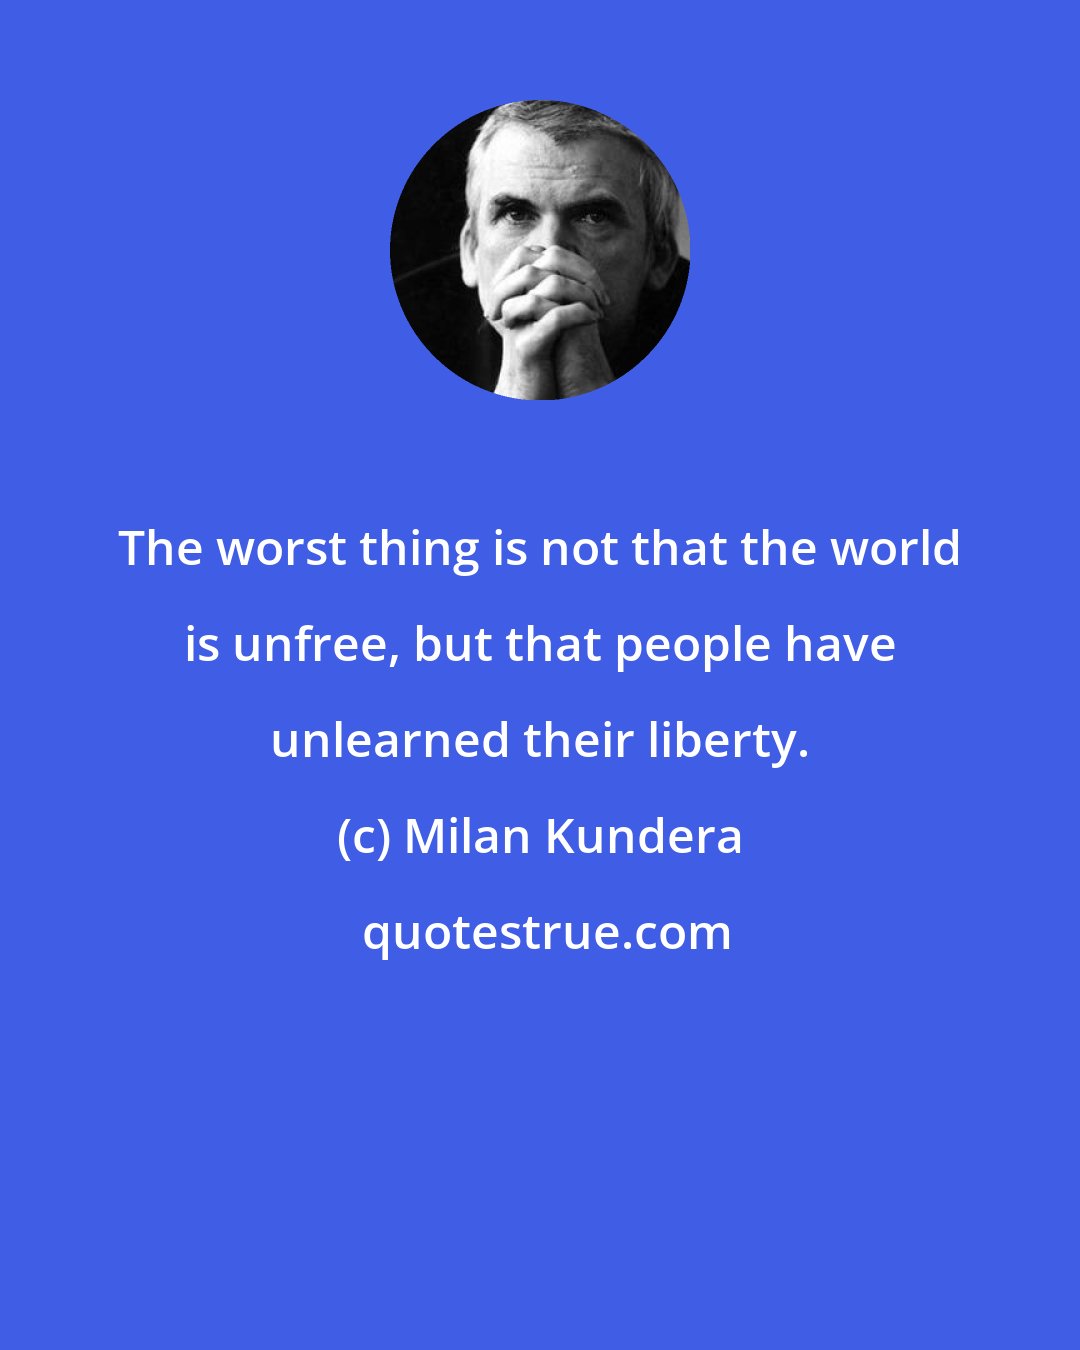 Milan Kundera: The worst thing is not that the world is unfree, but that people have unlearned their liberty.